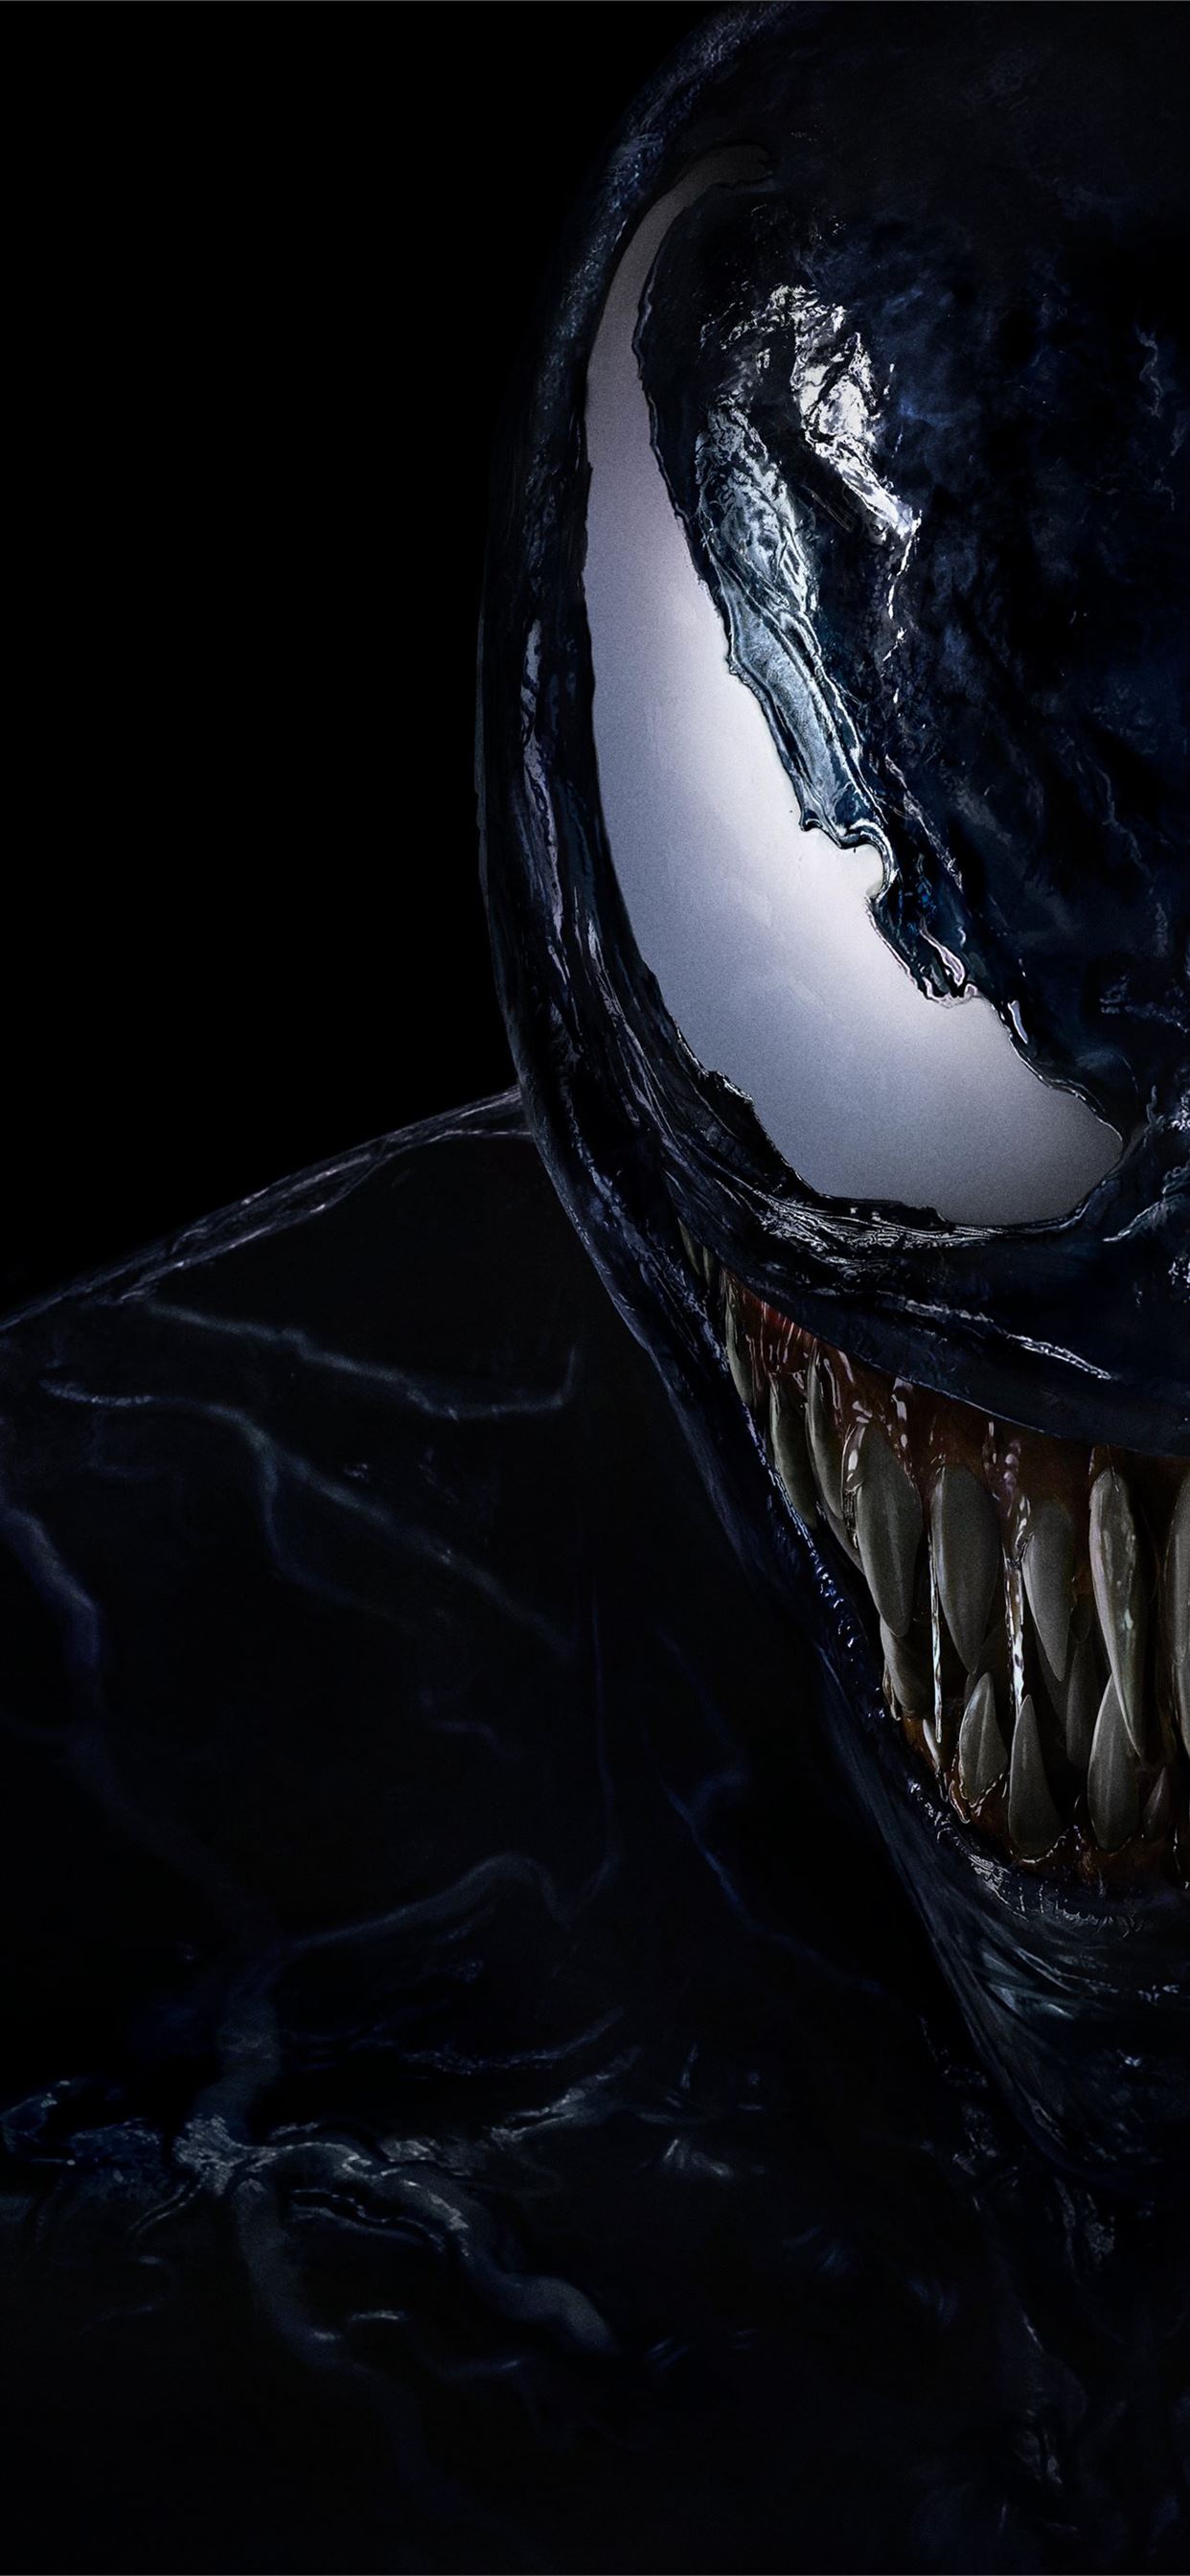 Venom Movie Official Poster 8k Samsung Galaxy Note iPhone Wallpapers  Free Download